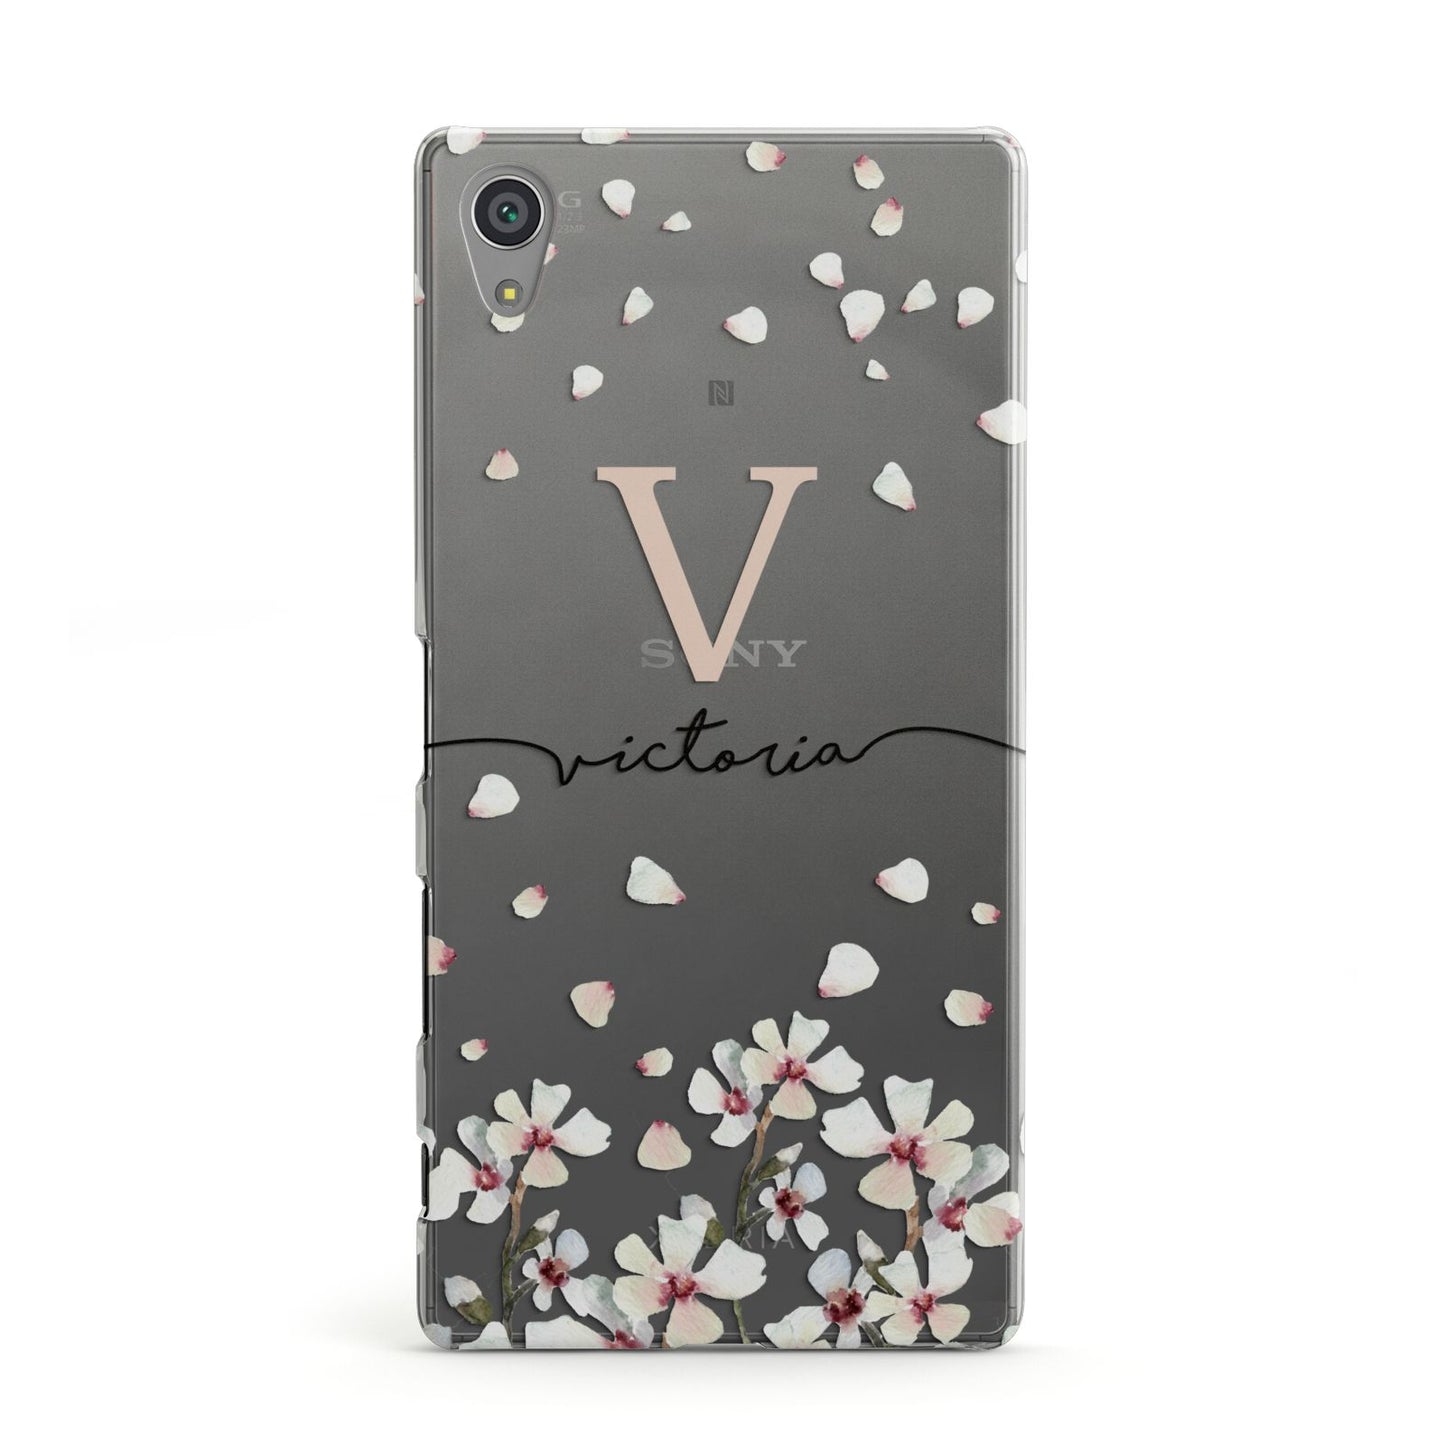 Personalised Petals Sony Xperia Case